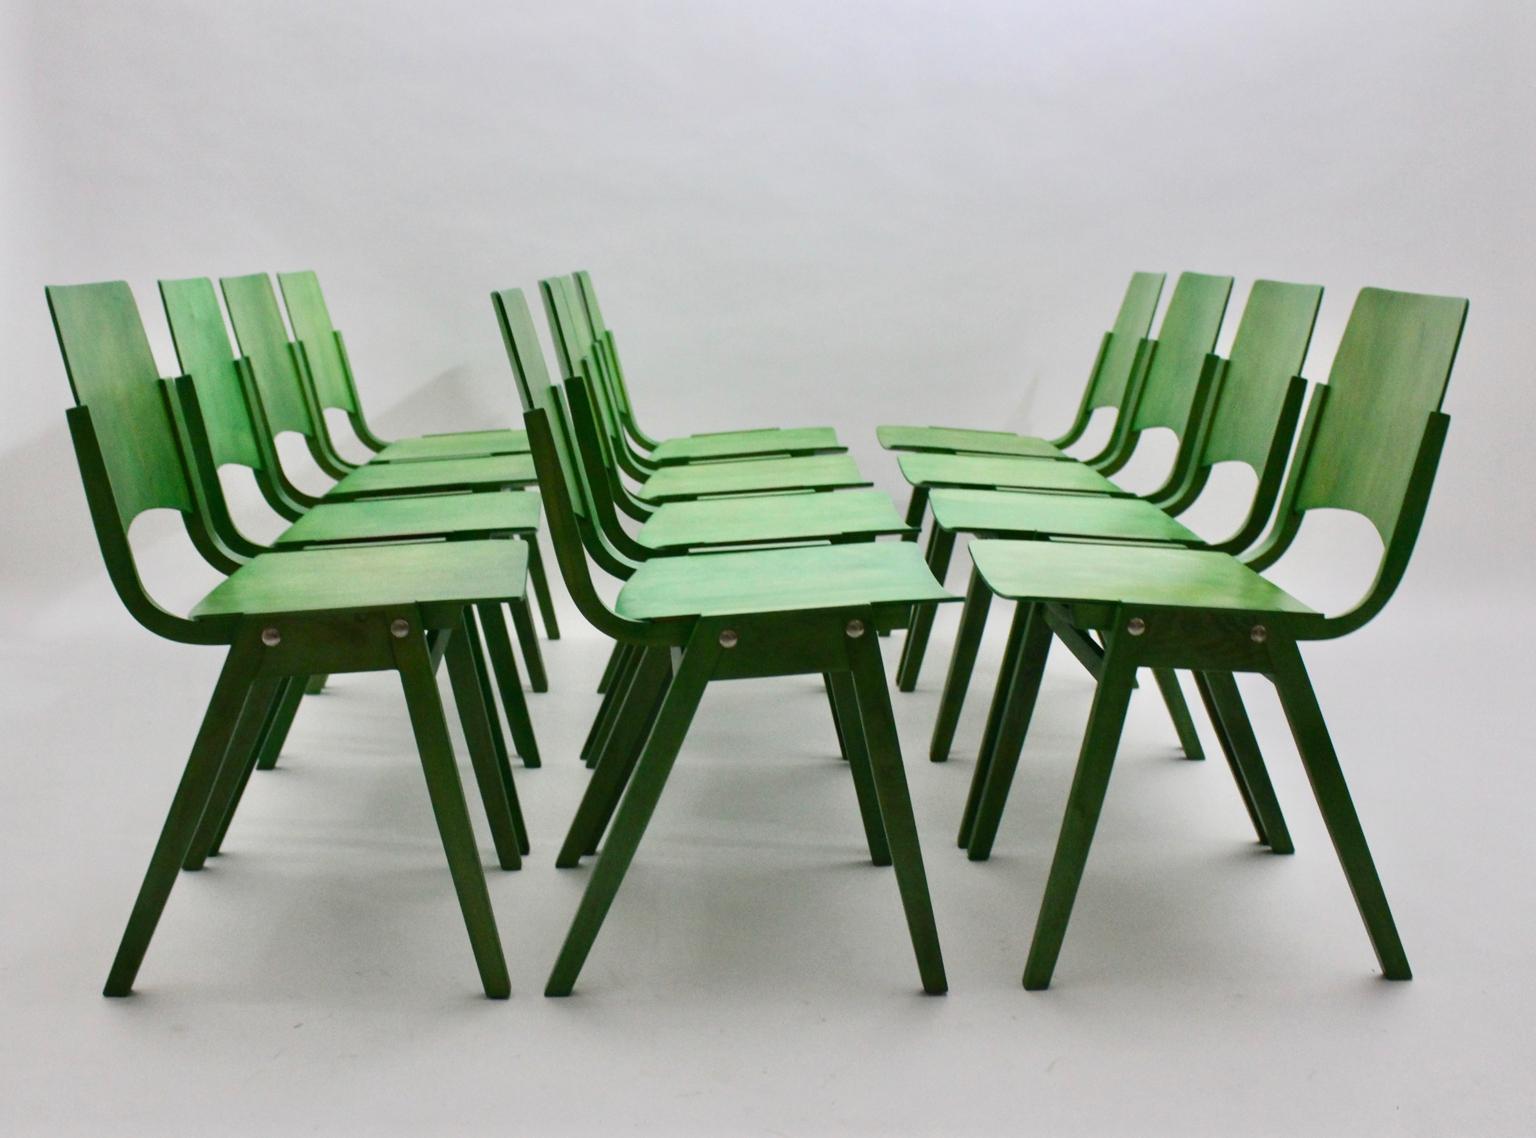 Mid Century Modern vintage set of 12 beech green vintage dining chairs model no. P7, which are also stackable, designed by Roland Rainer for the Viennese Stadthalle (backstage area) 1952 and executed by Emil & Alfred Pollak Vienna.
These vintage